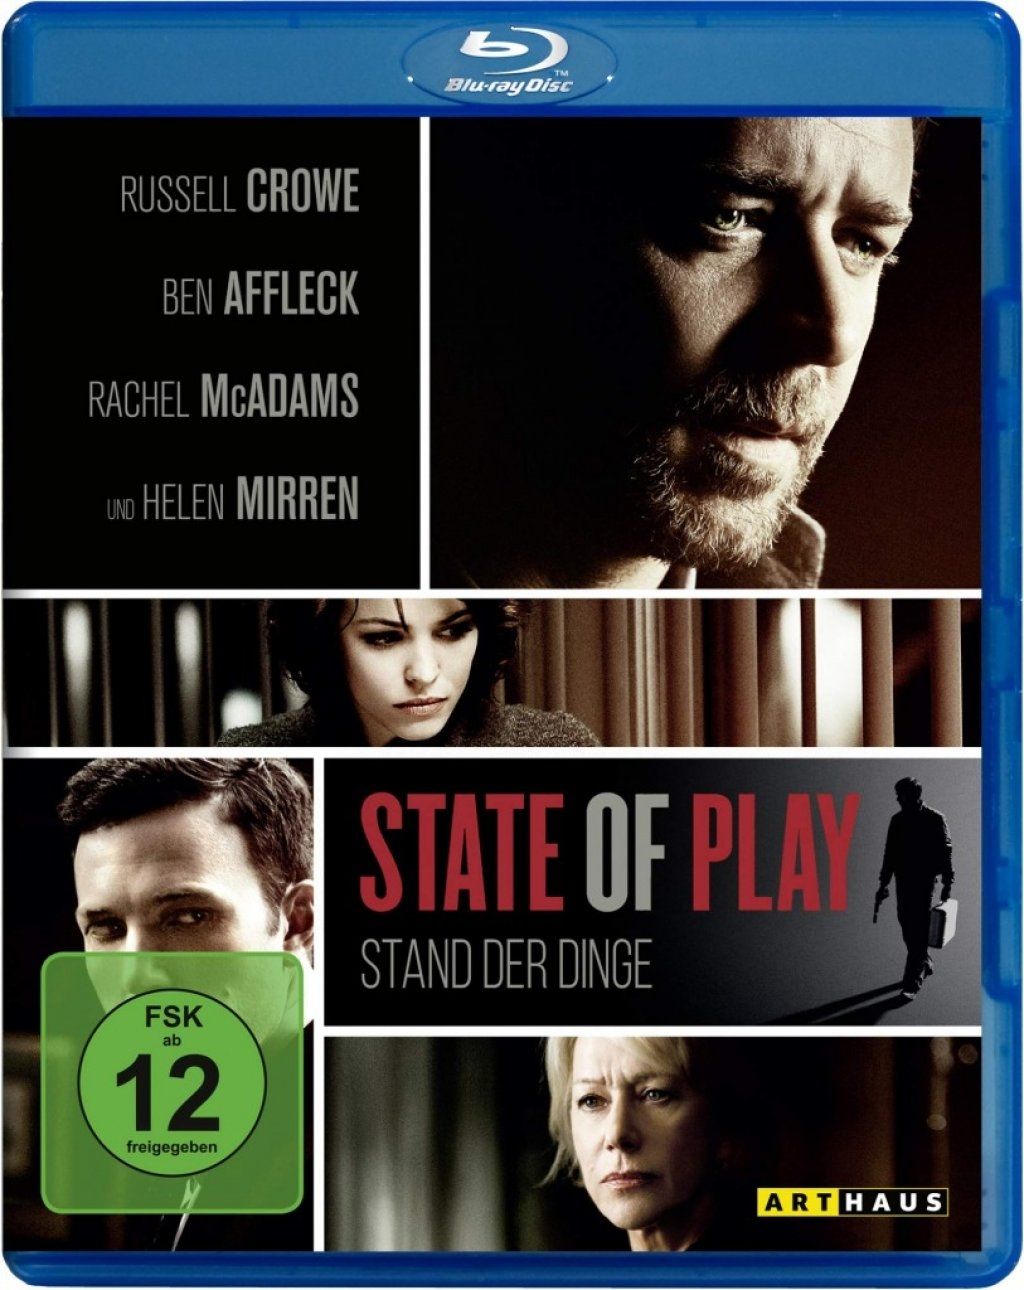 State of Play - Stand der Dinge (BLURAY)